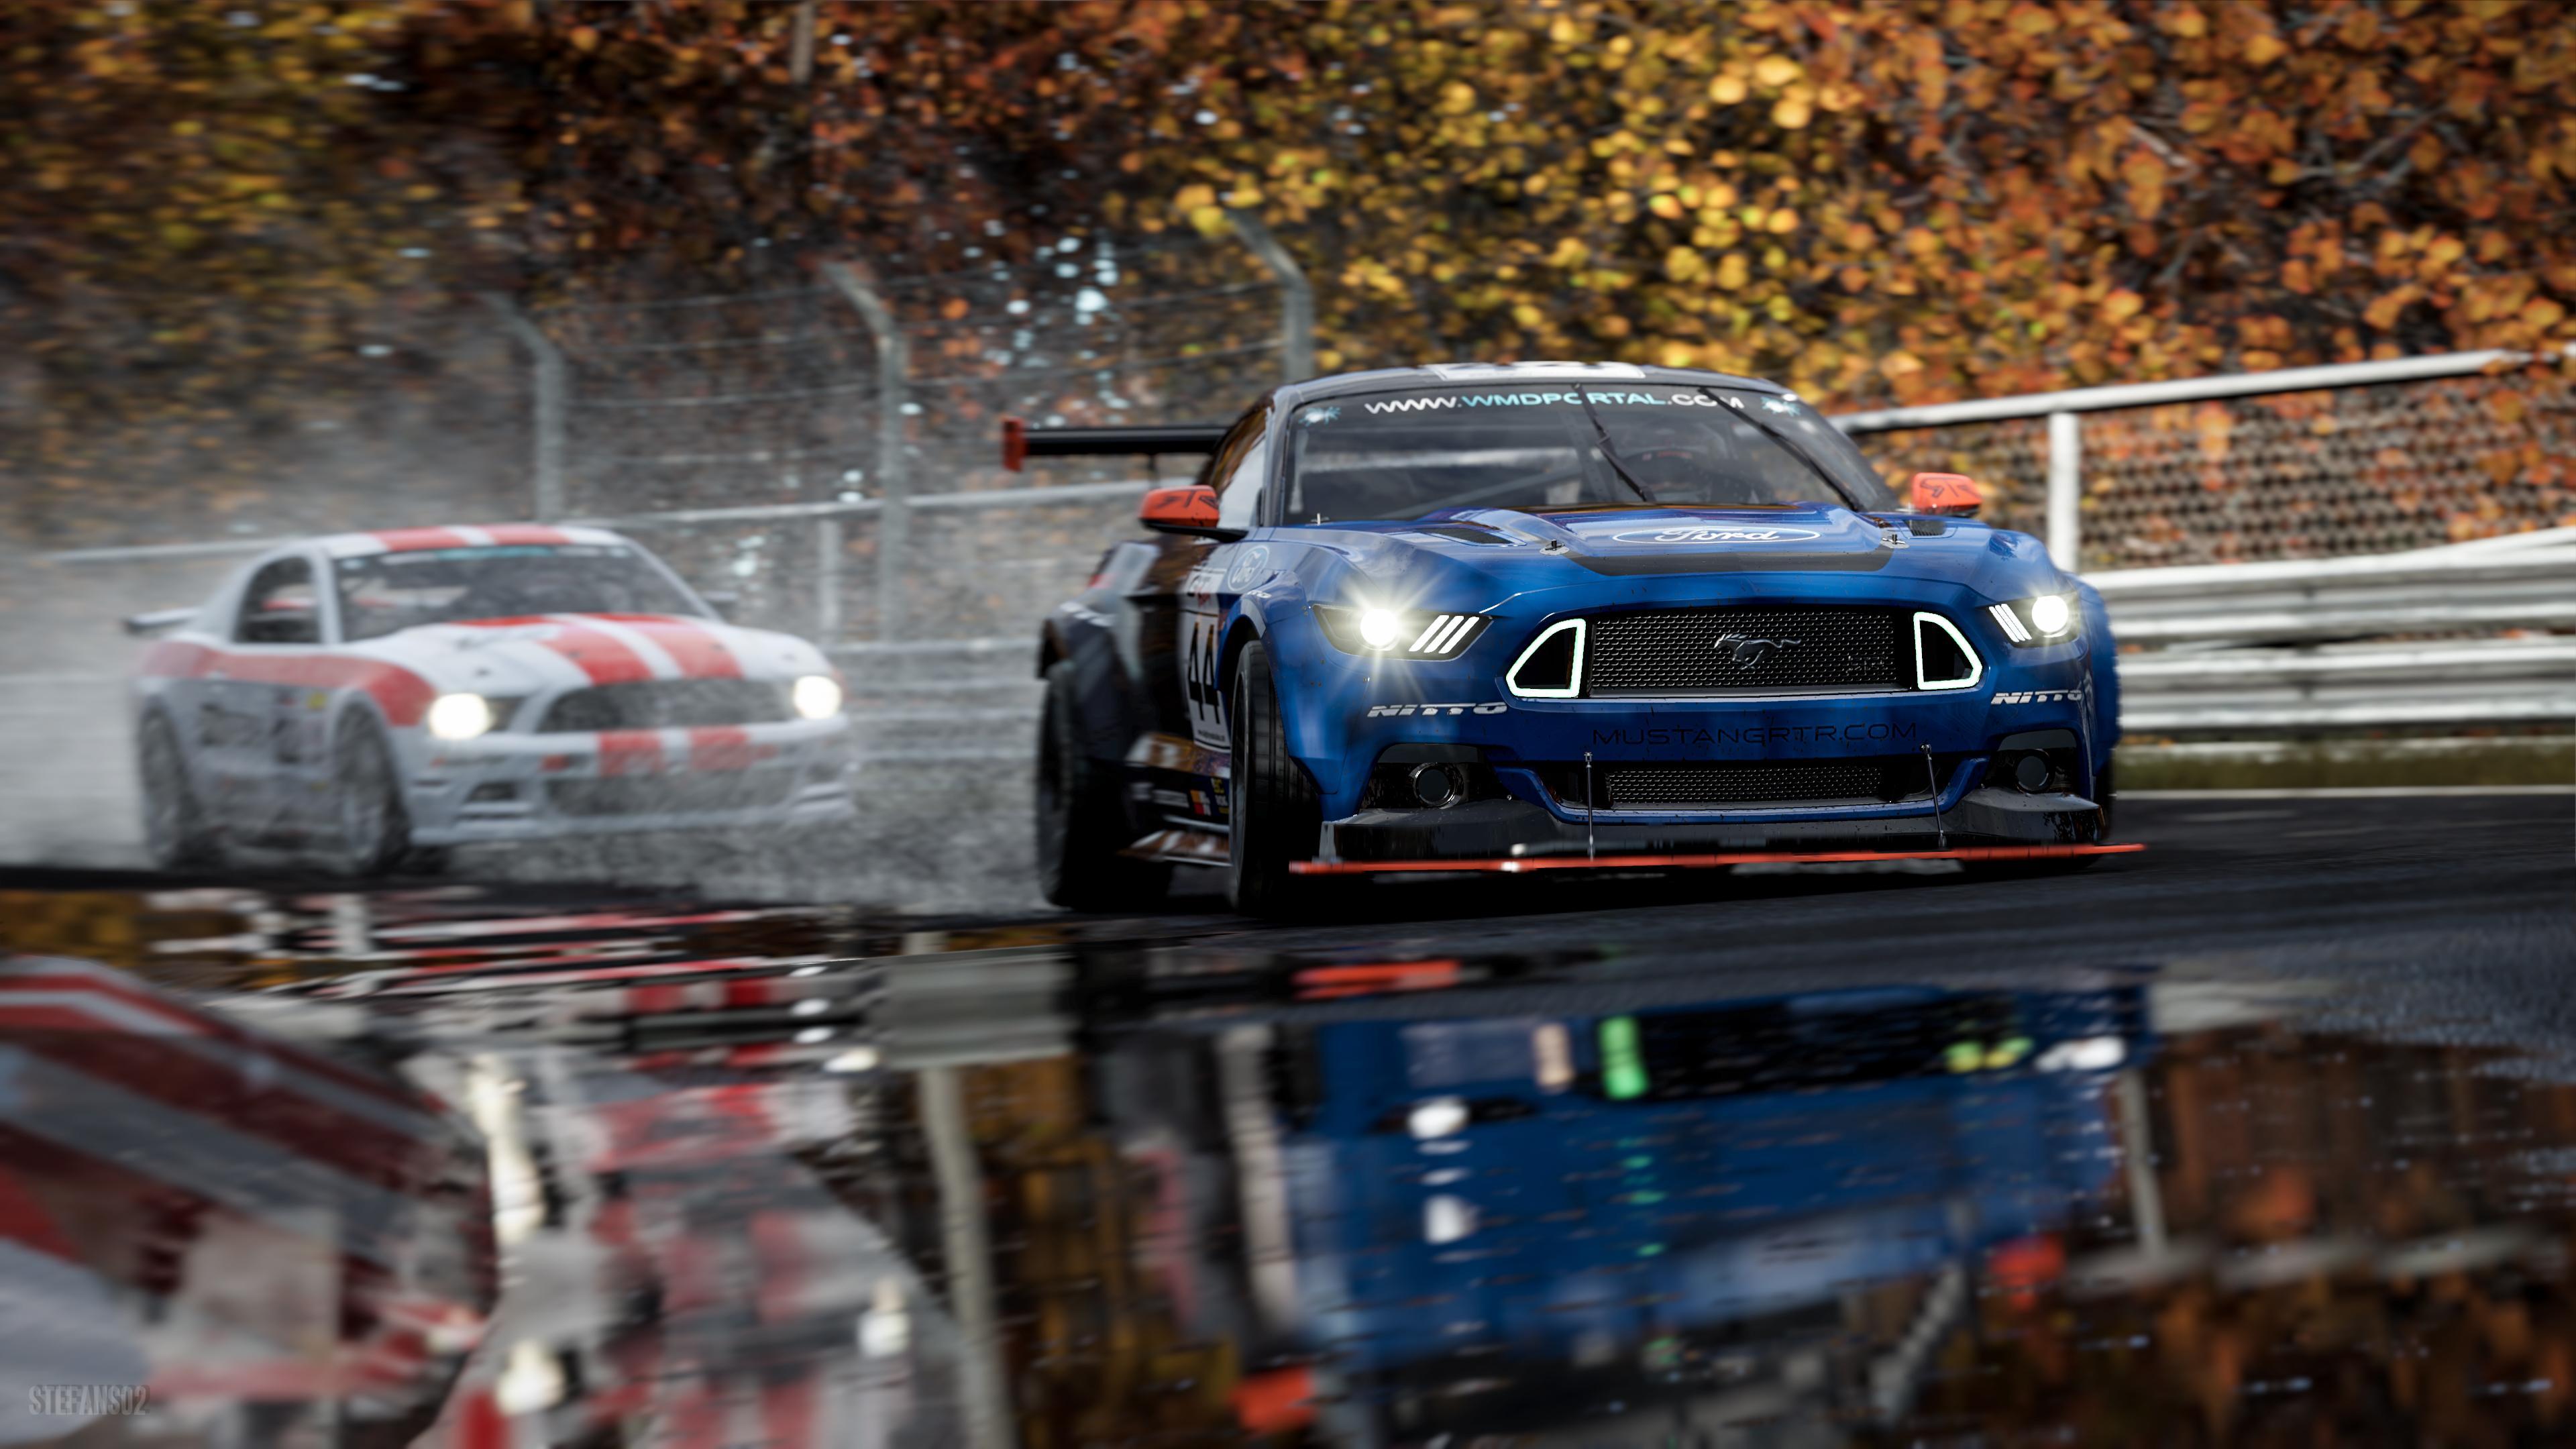 Ford Mustang RTR Project Cars 2 4k, HD Cars, 4k Wallpaper